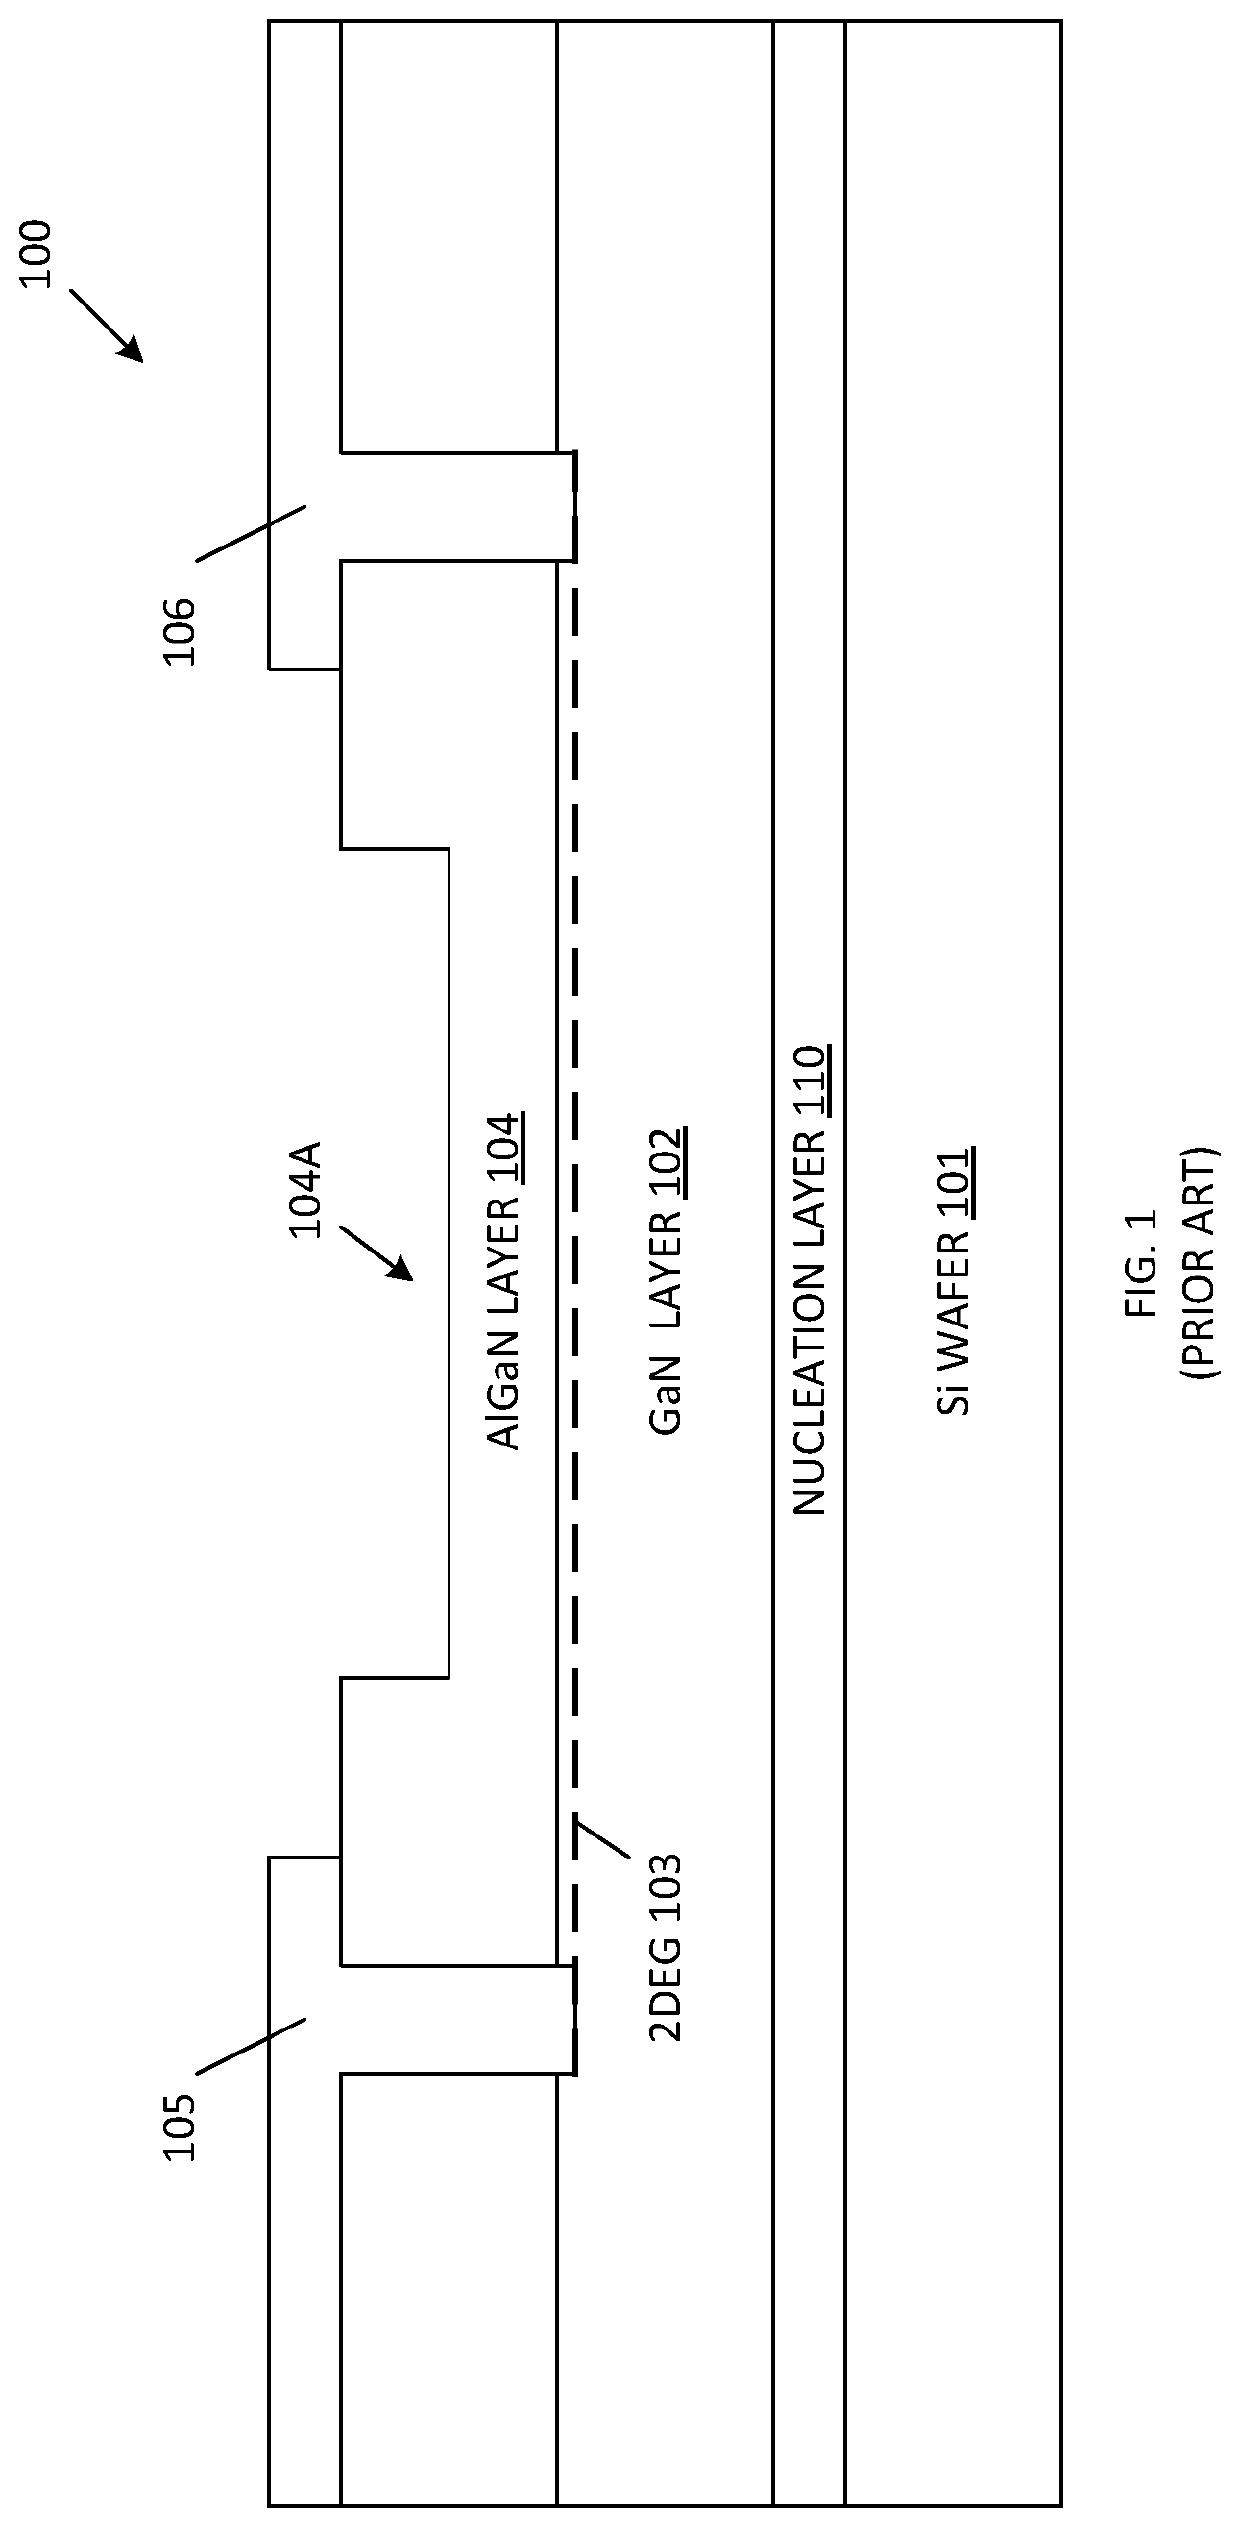 Method of forming a GaN sensor having a controlled and stable threshold voltage